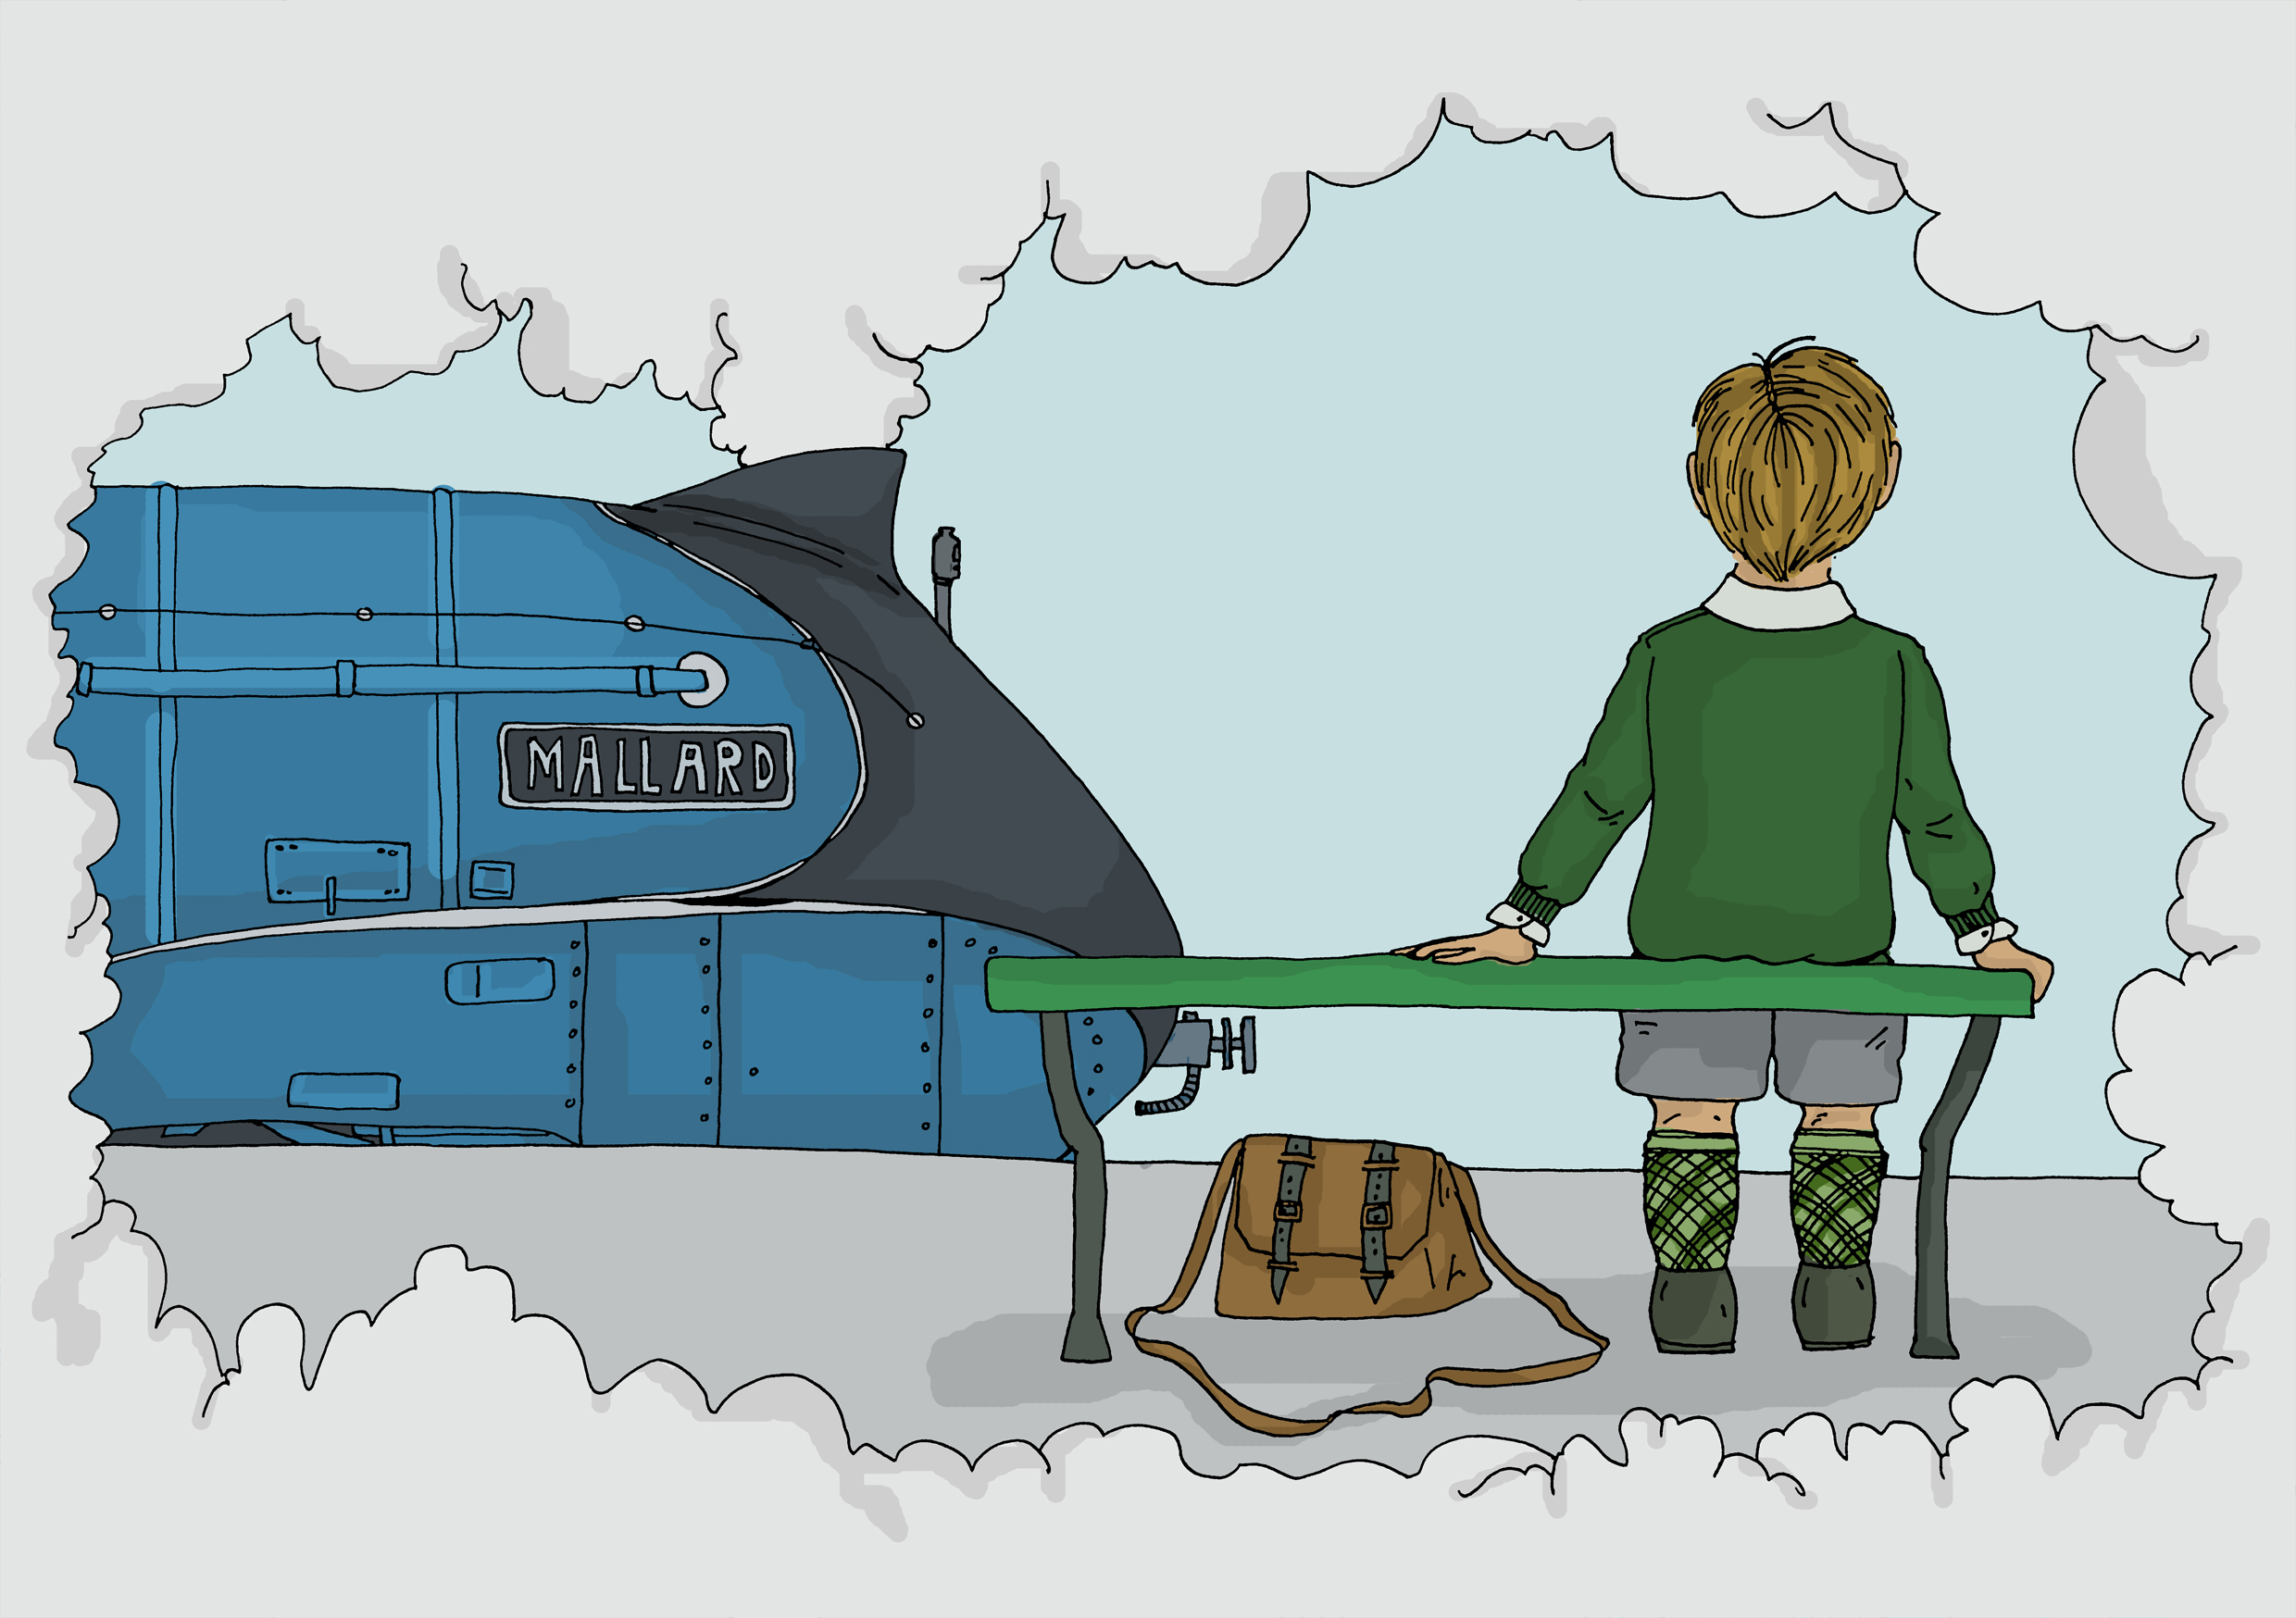 illustration of a child sitting on a bench with mallard the steam train in the background